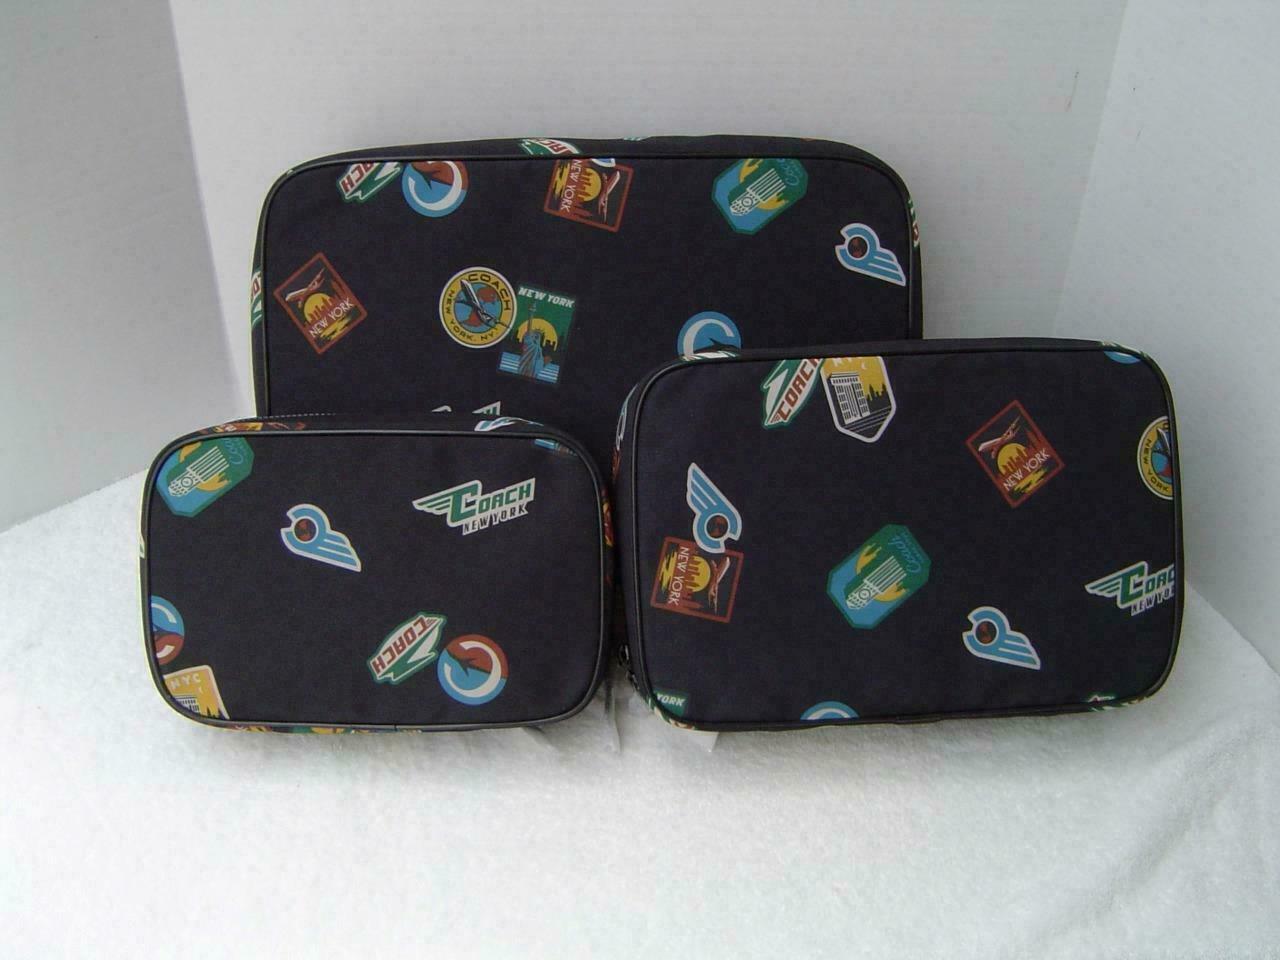 NWT Coach Travel Luggage Packing Cubes Set Of 3 In Nylon & Leather With Patches